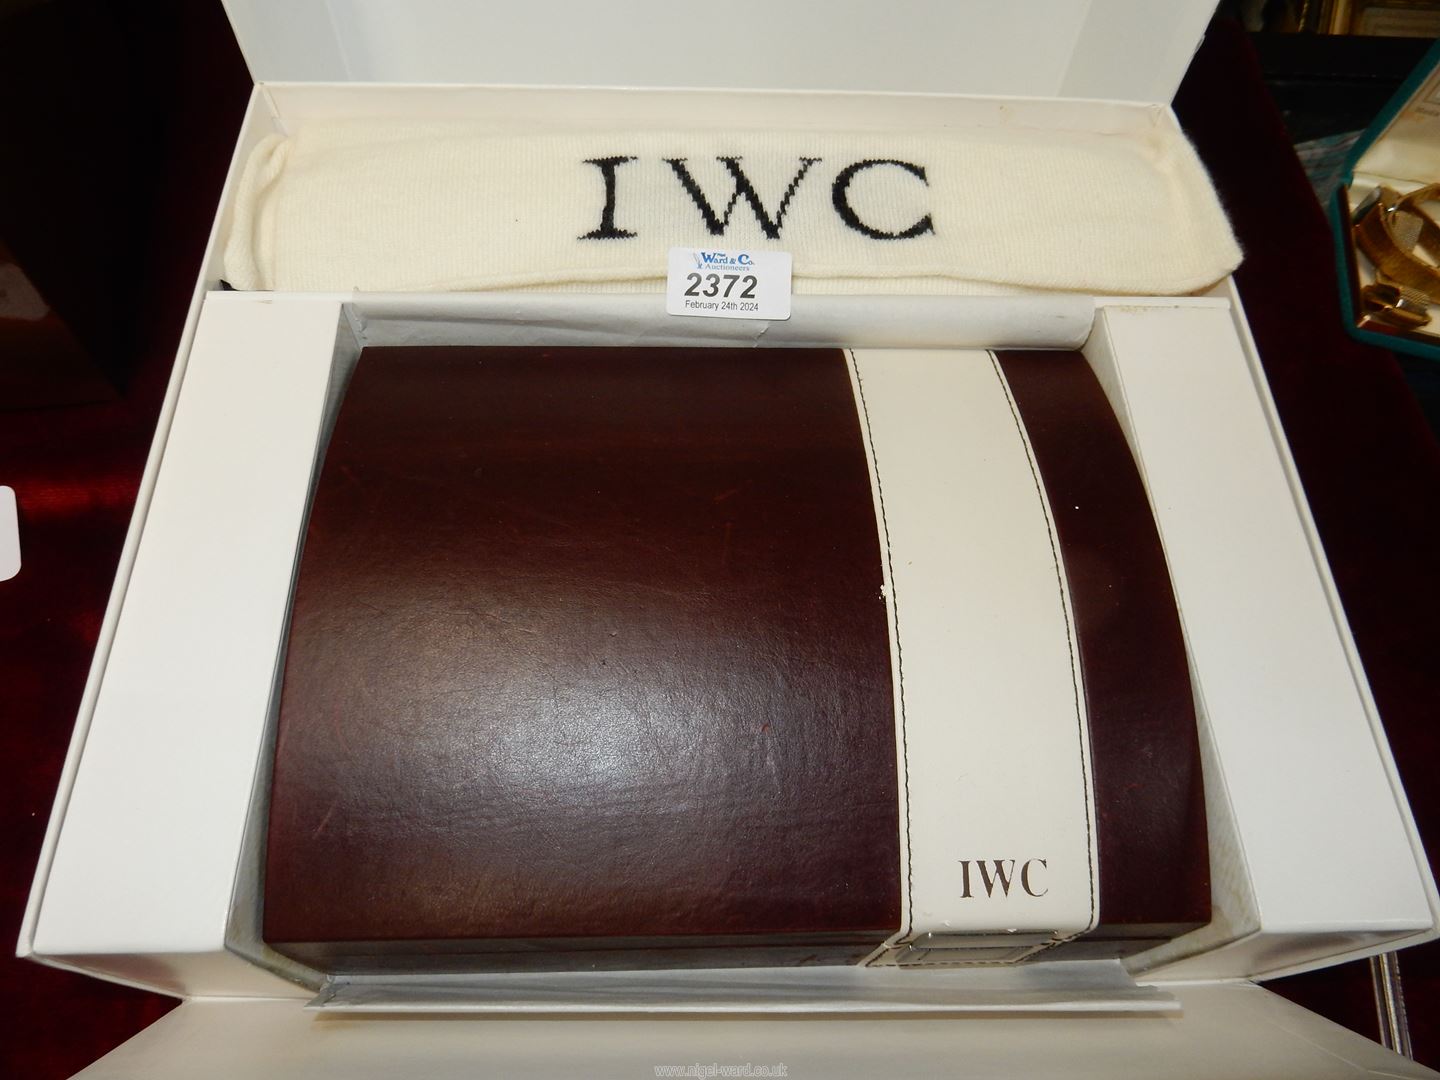 An original box for a IWC Spitfire Chronograph Watch including Italian Cashmere Scarf and papers.